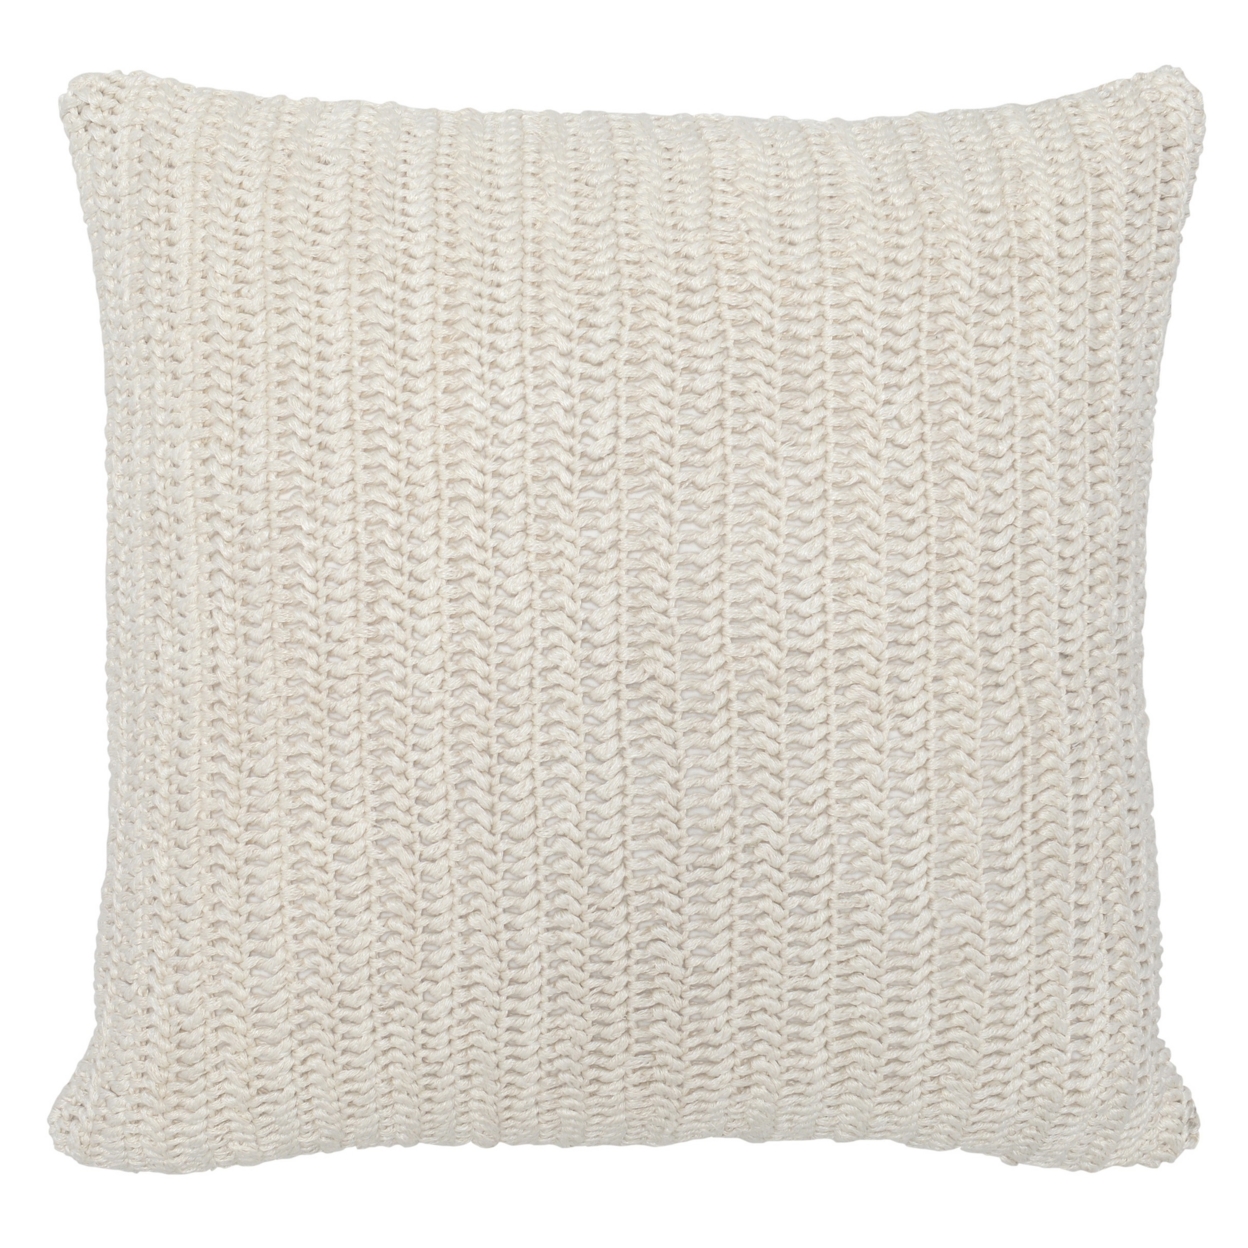 Square Fabric Throw Pillow With Hand Knit Details And Knife Edges, White- Saltoro Sherpi